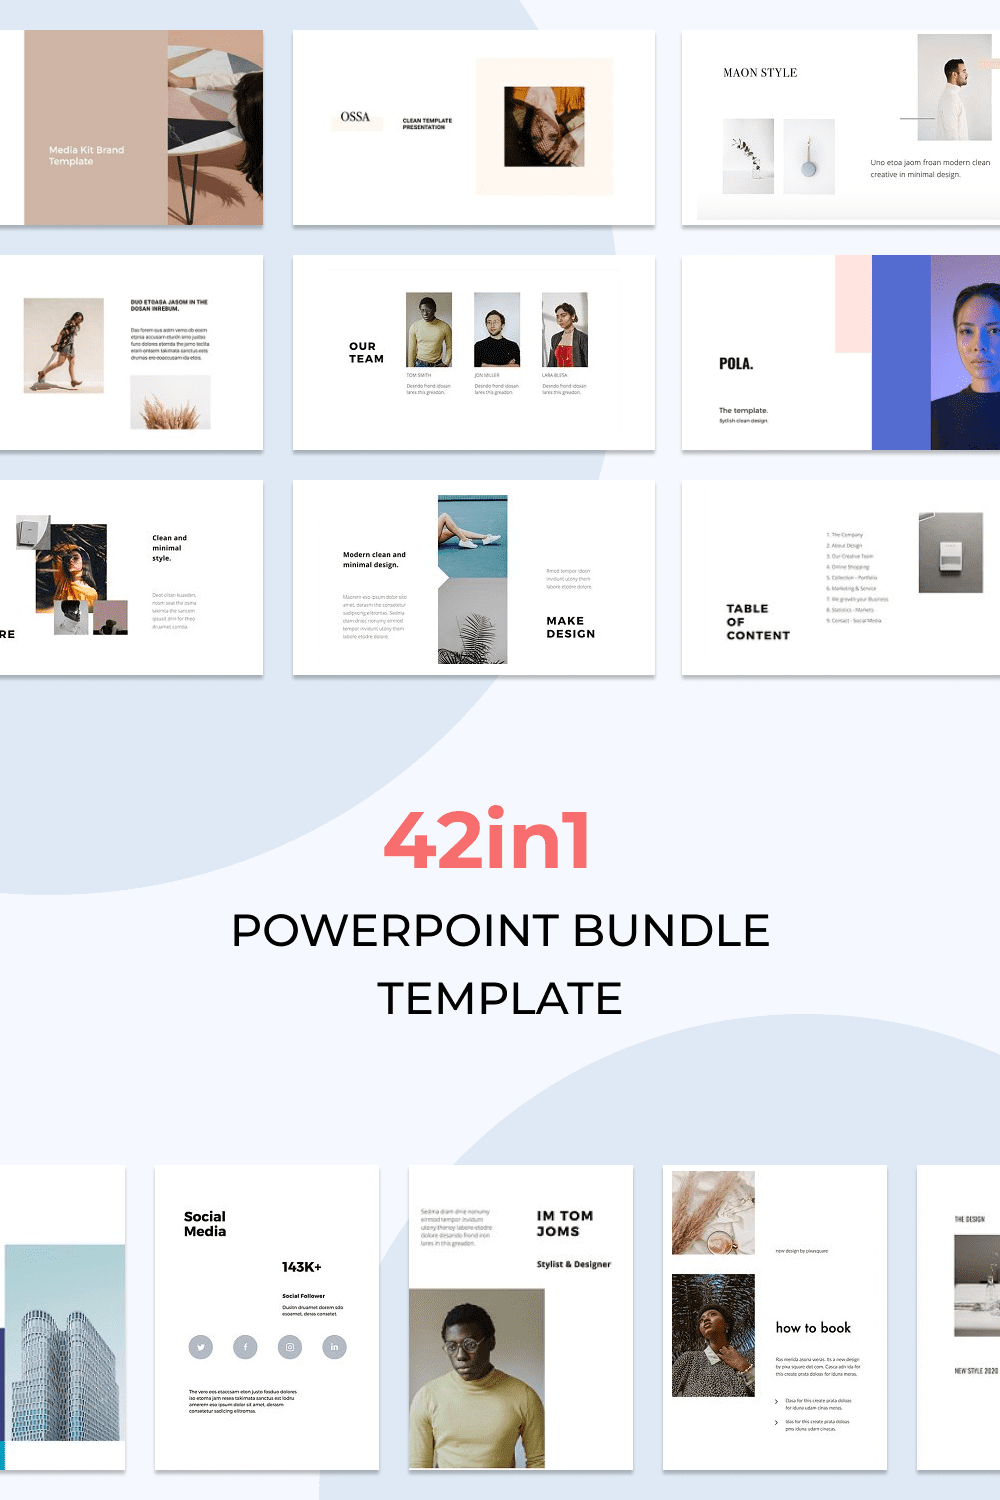 42in1 Powerpoint Bundle Template by MasterBundles Pinterest Collage Image.